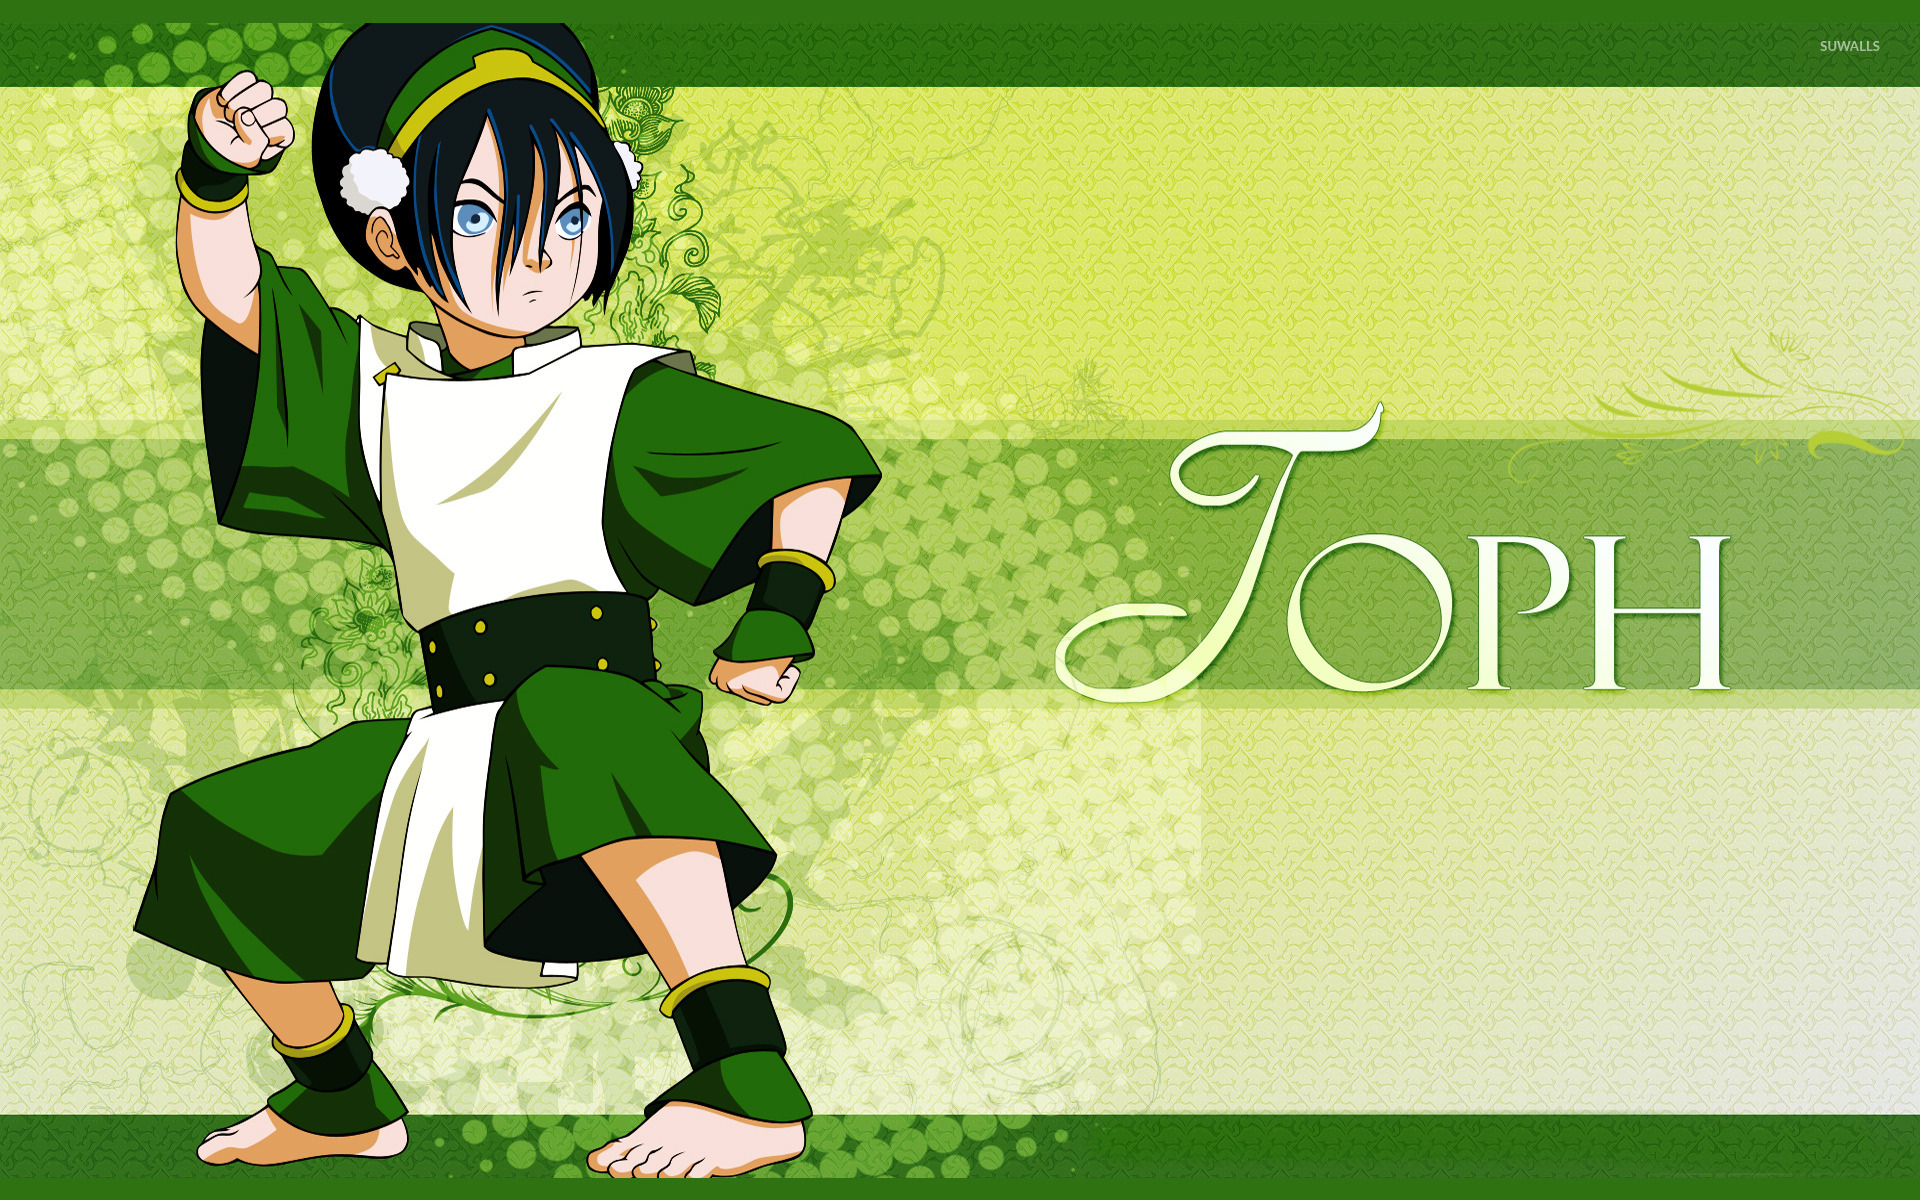 Toph Bei Fong  Avatar The Last Airbender  Mobile Wallpaper by  Quirkilicious 1202153  Zerochan Anime Image Board Mobile